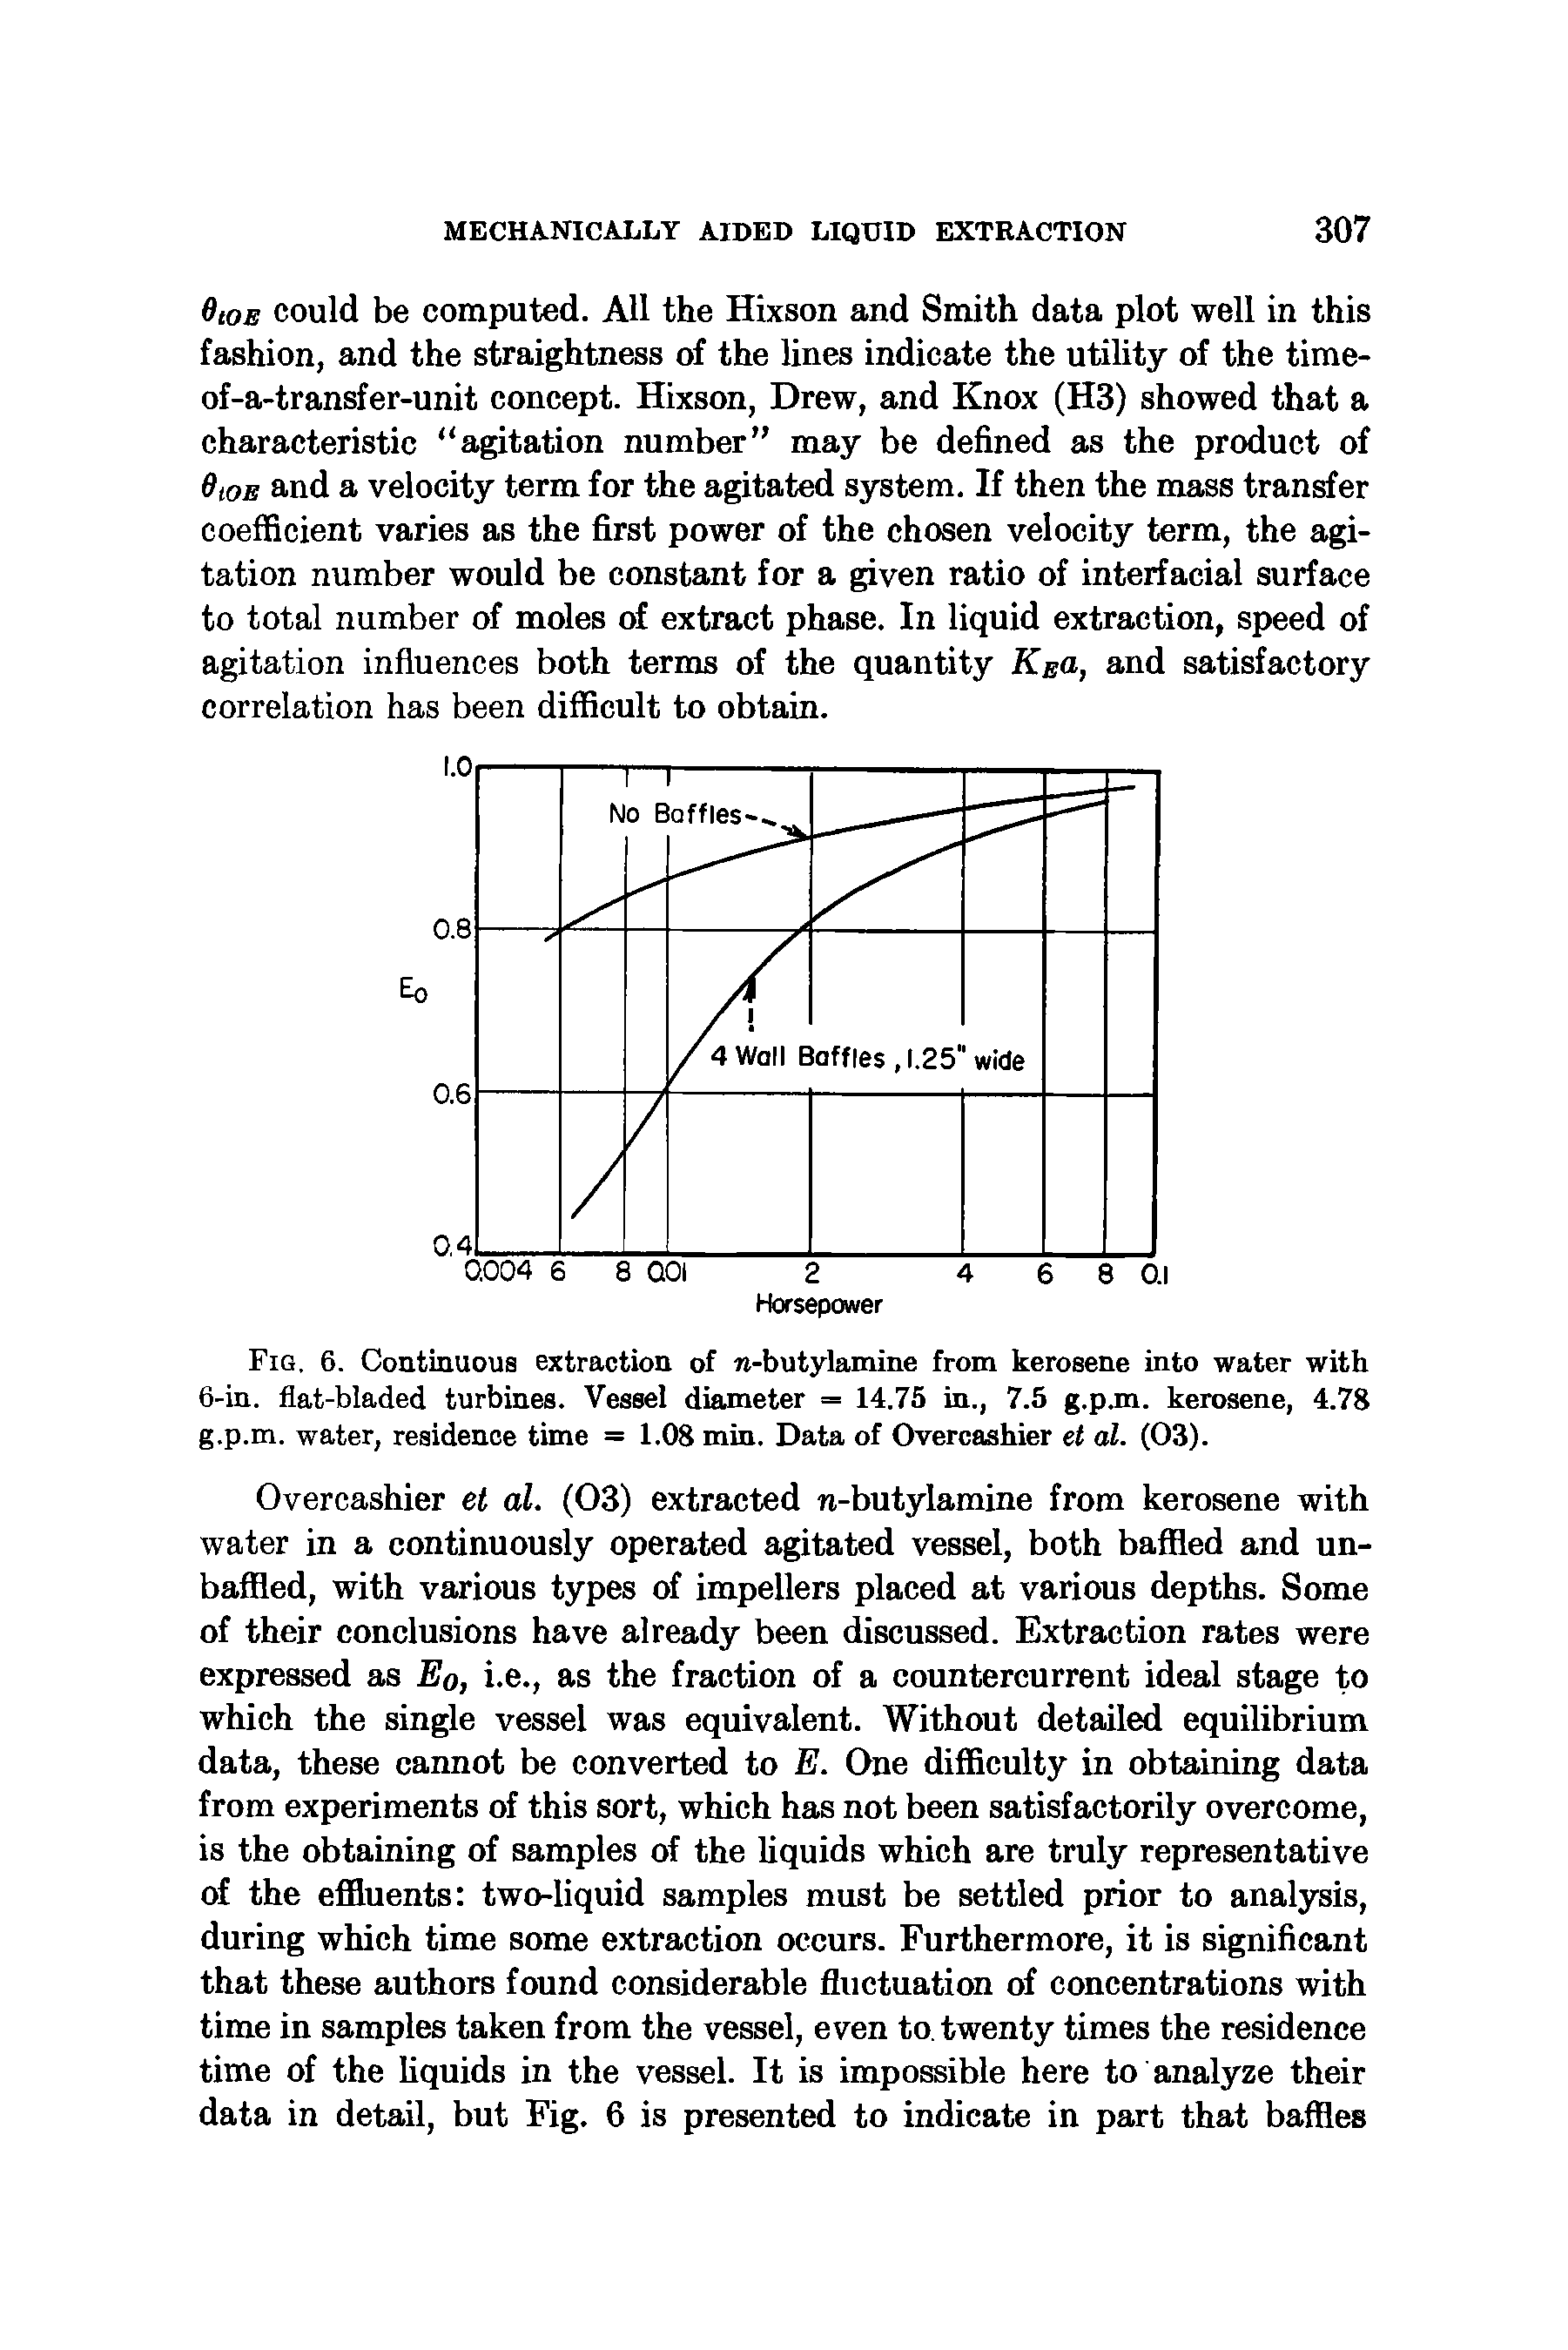 Fig. 6. Continuous extraction of w-butylamine from kerosene into water with 6-in. flat-bladed turbines. Vessel diameter = 14.75 in., 7.5 g.p.m. kerosene, 4.78 g.p.m. water, residence time = 1.08 min. Data of Overcashier et al. (03).